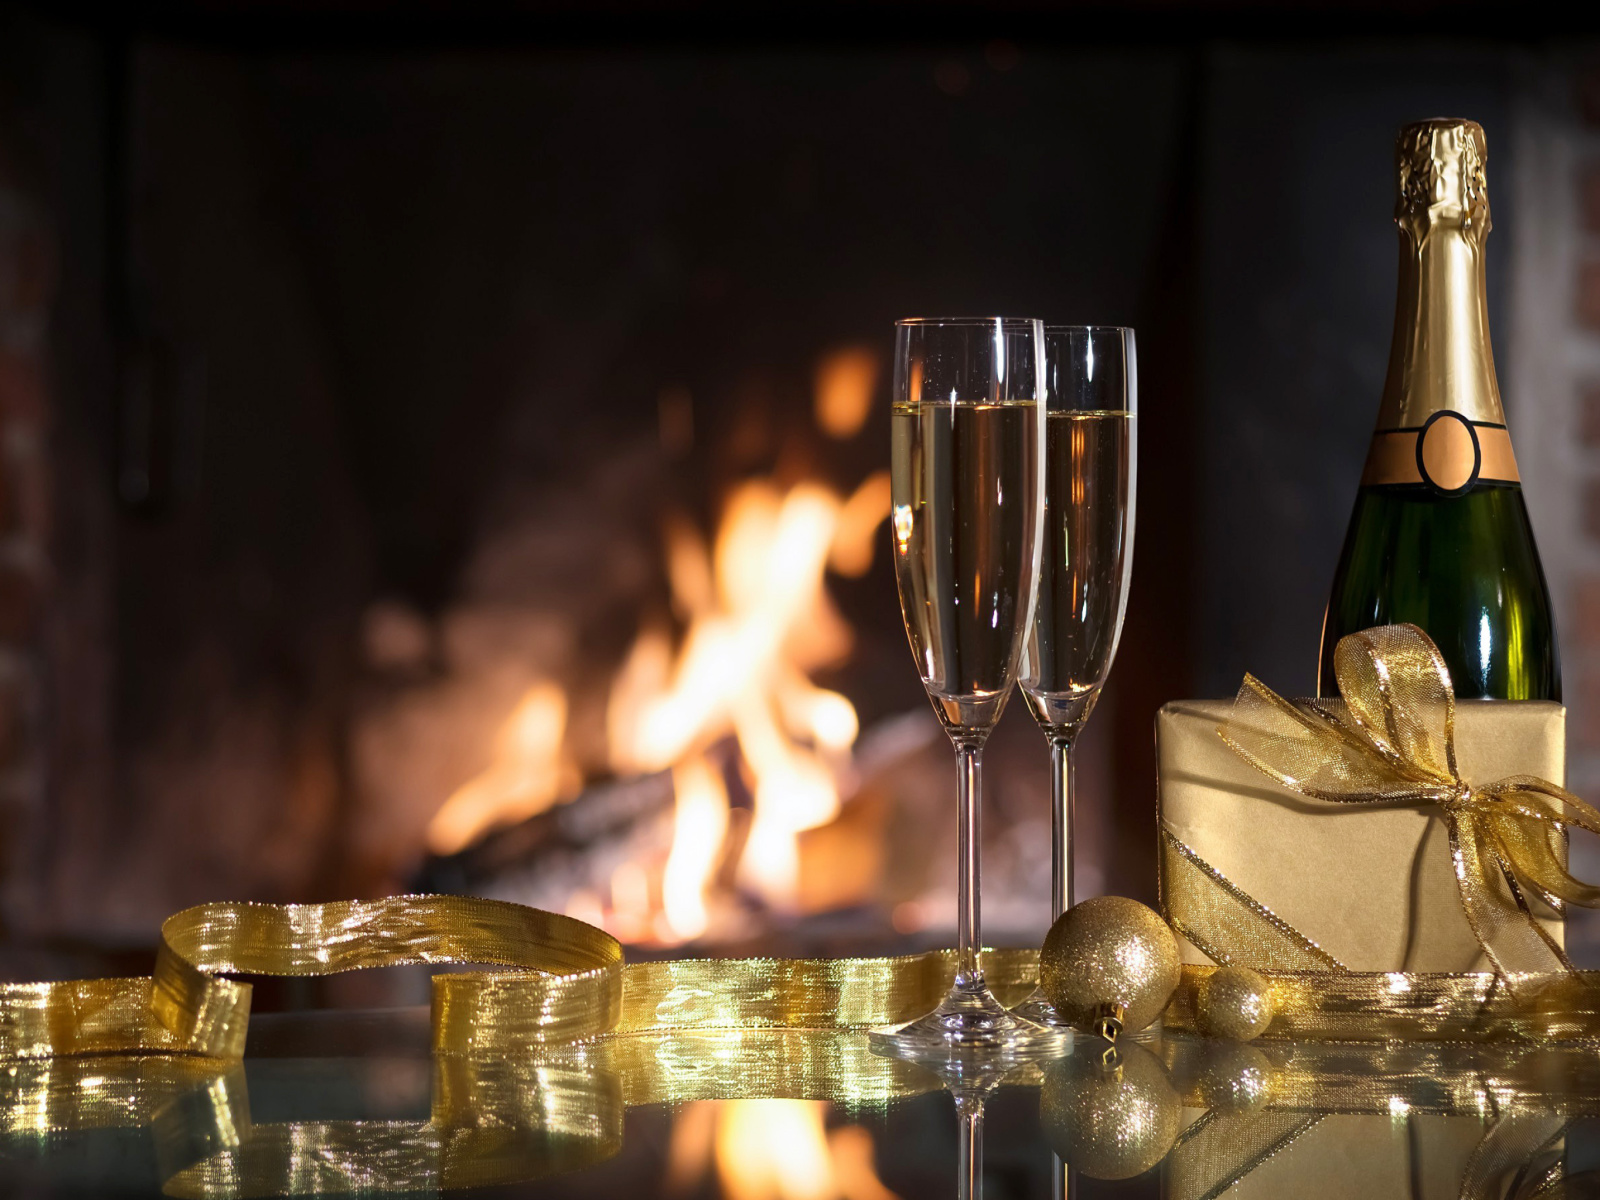 Das Champagne and Fireplace Wallpaper 1600x1200